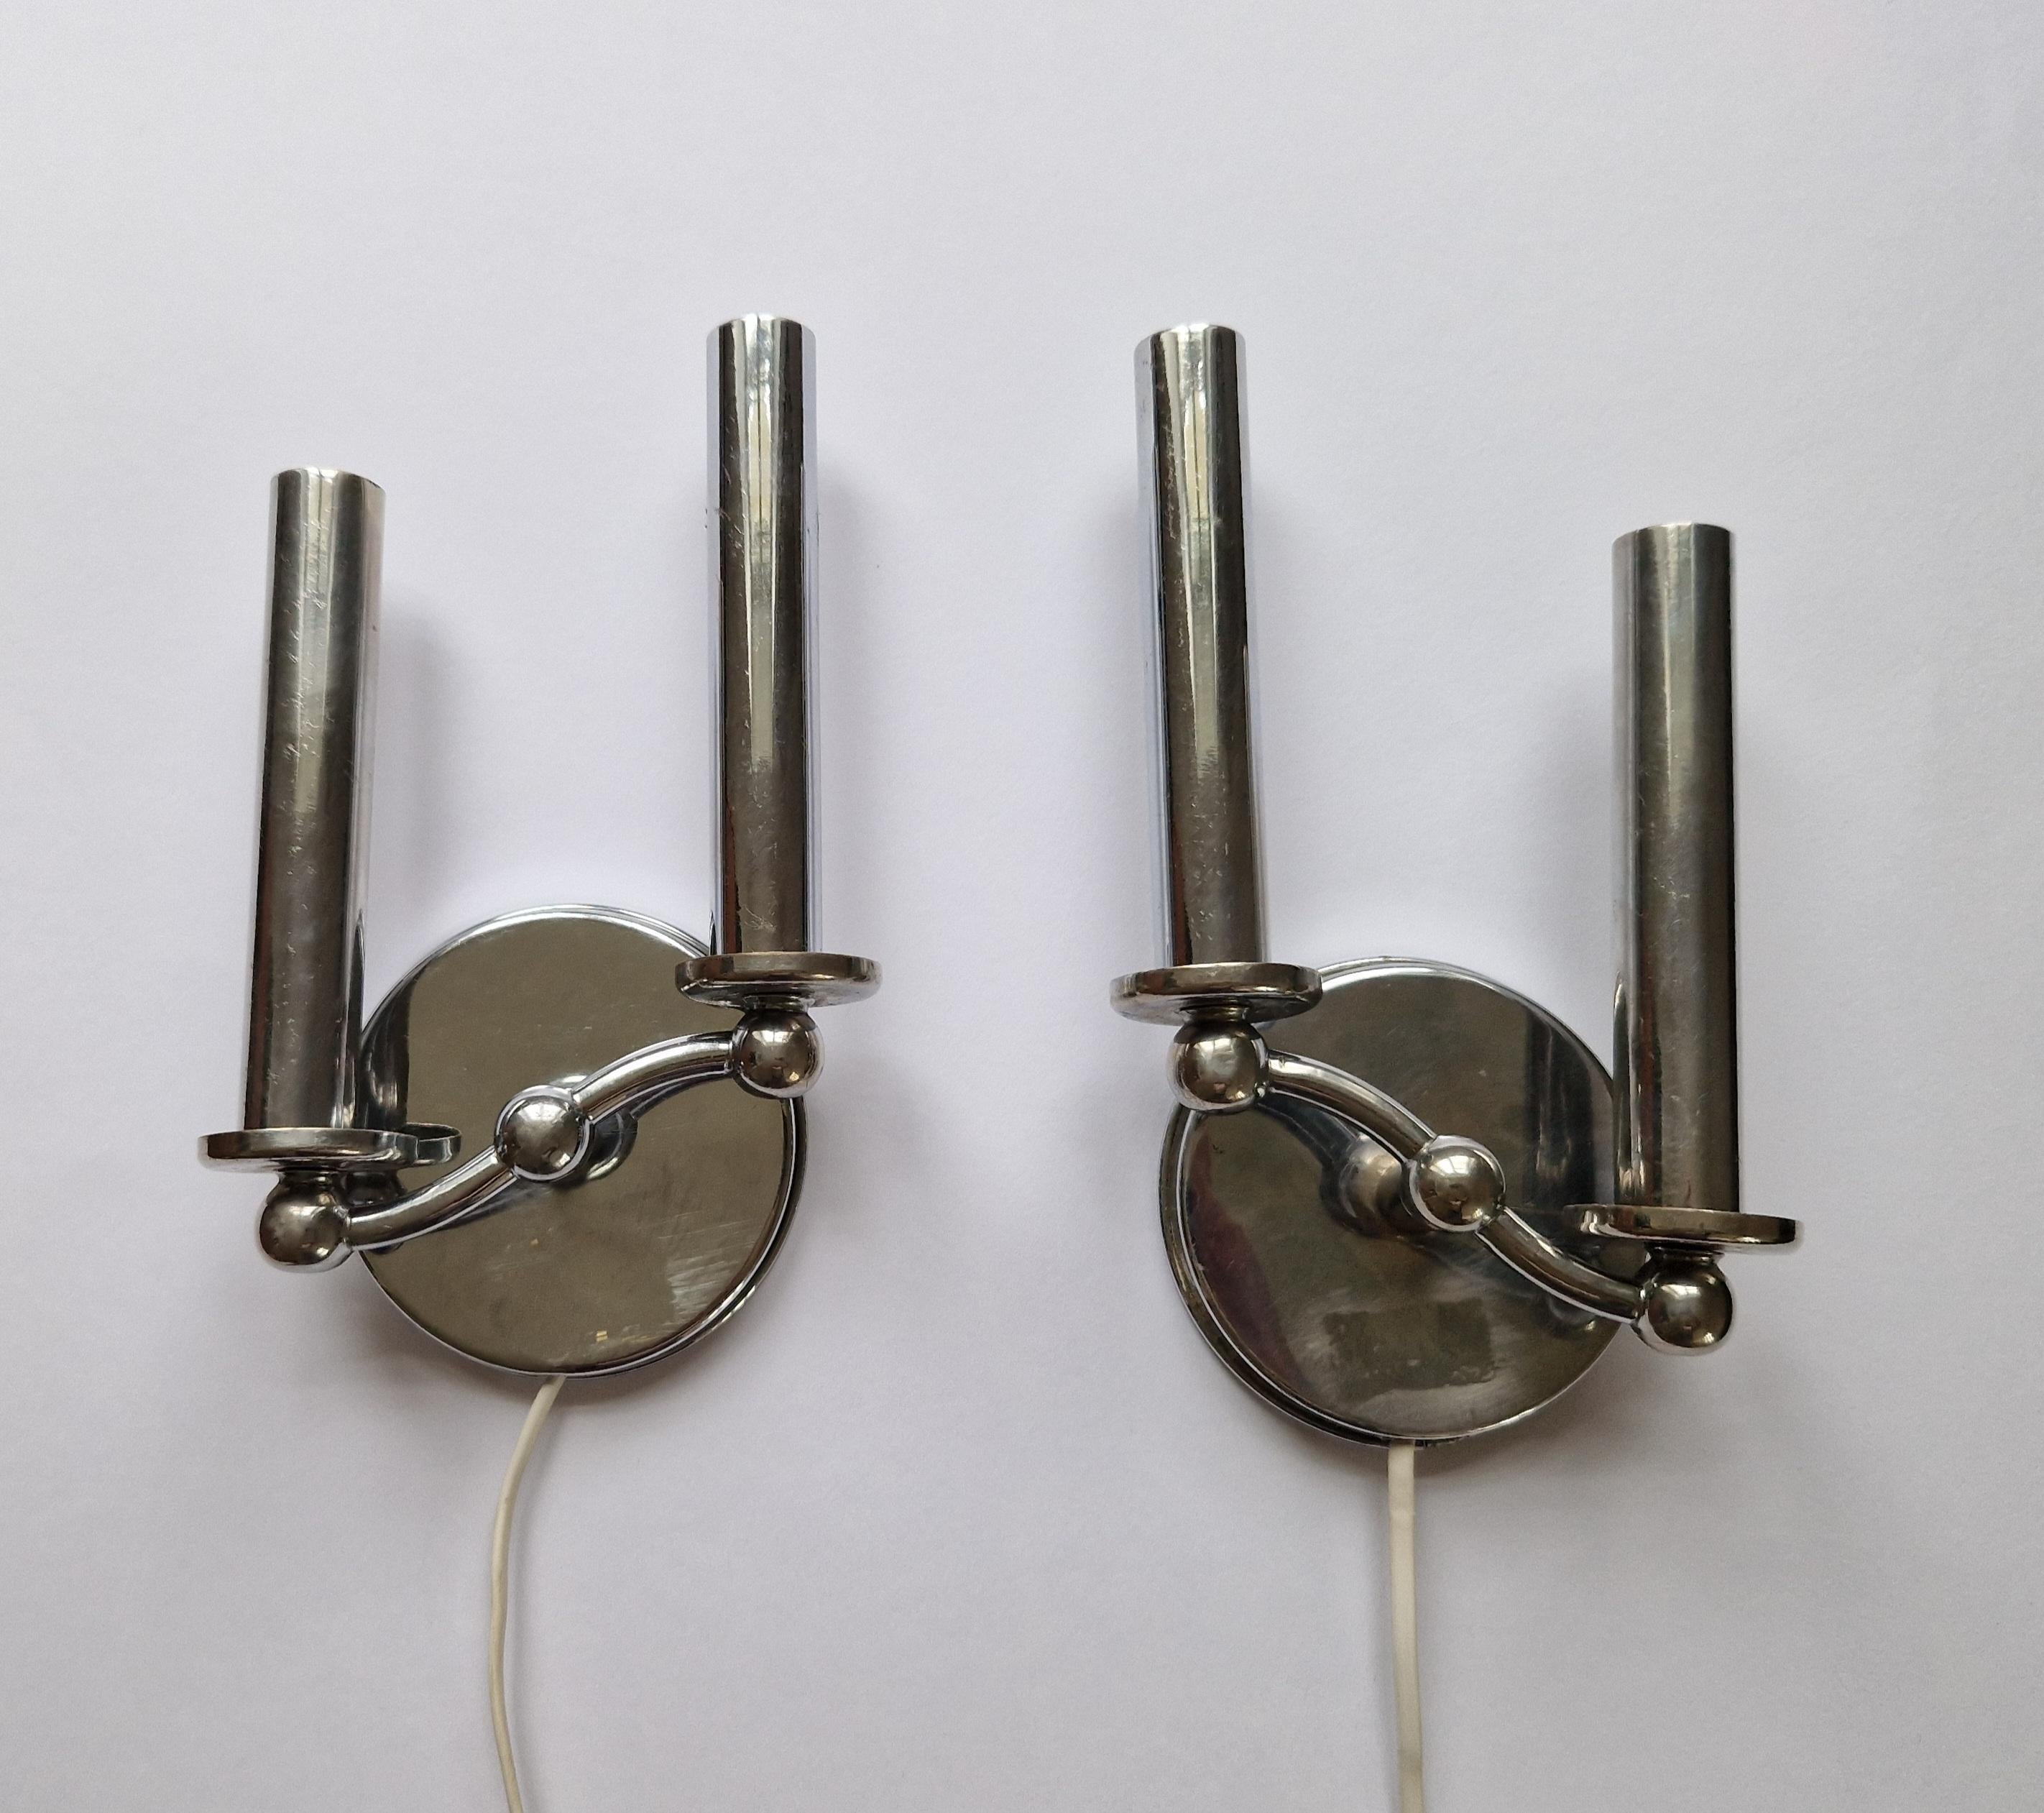 Pair of Rare Chrome Art Deco / Functionalism Wall Lamps, 1930s For Sale 4